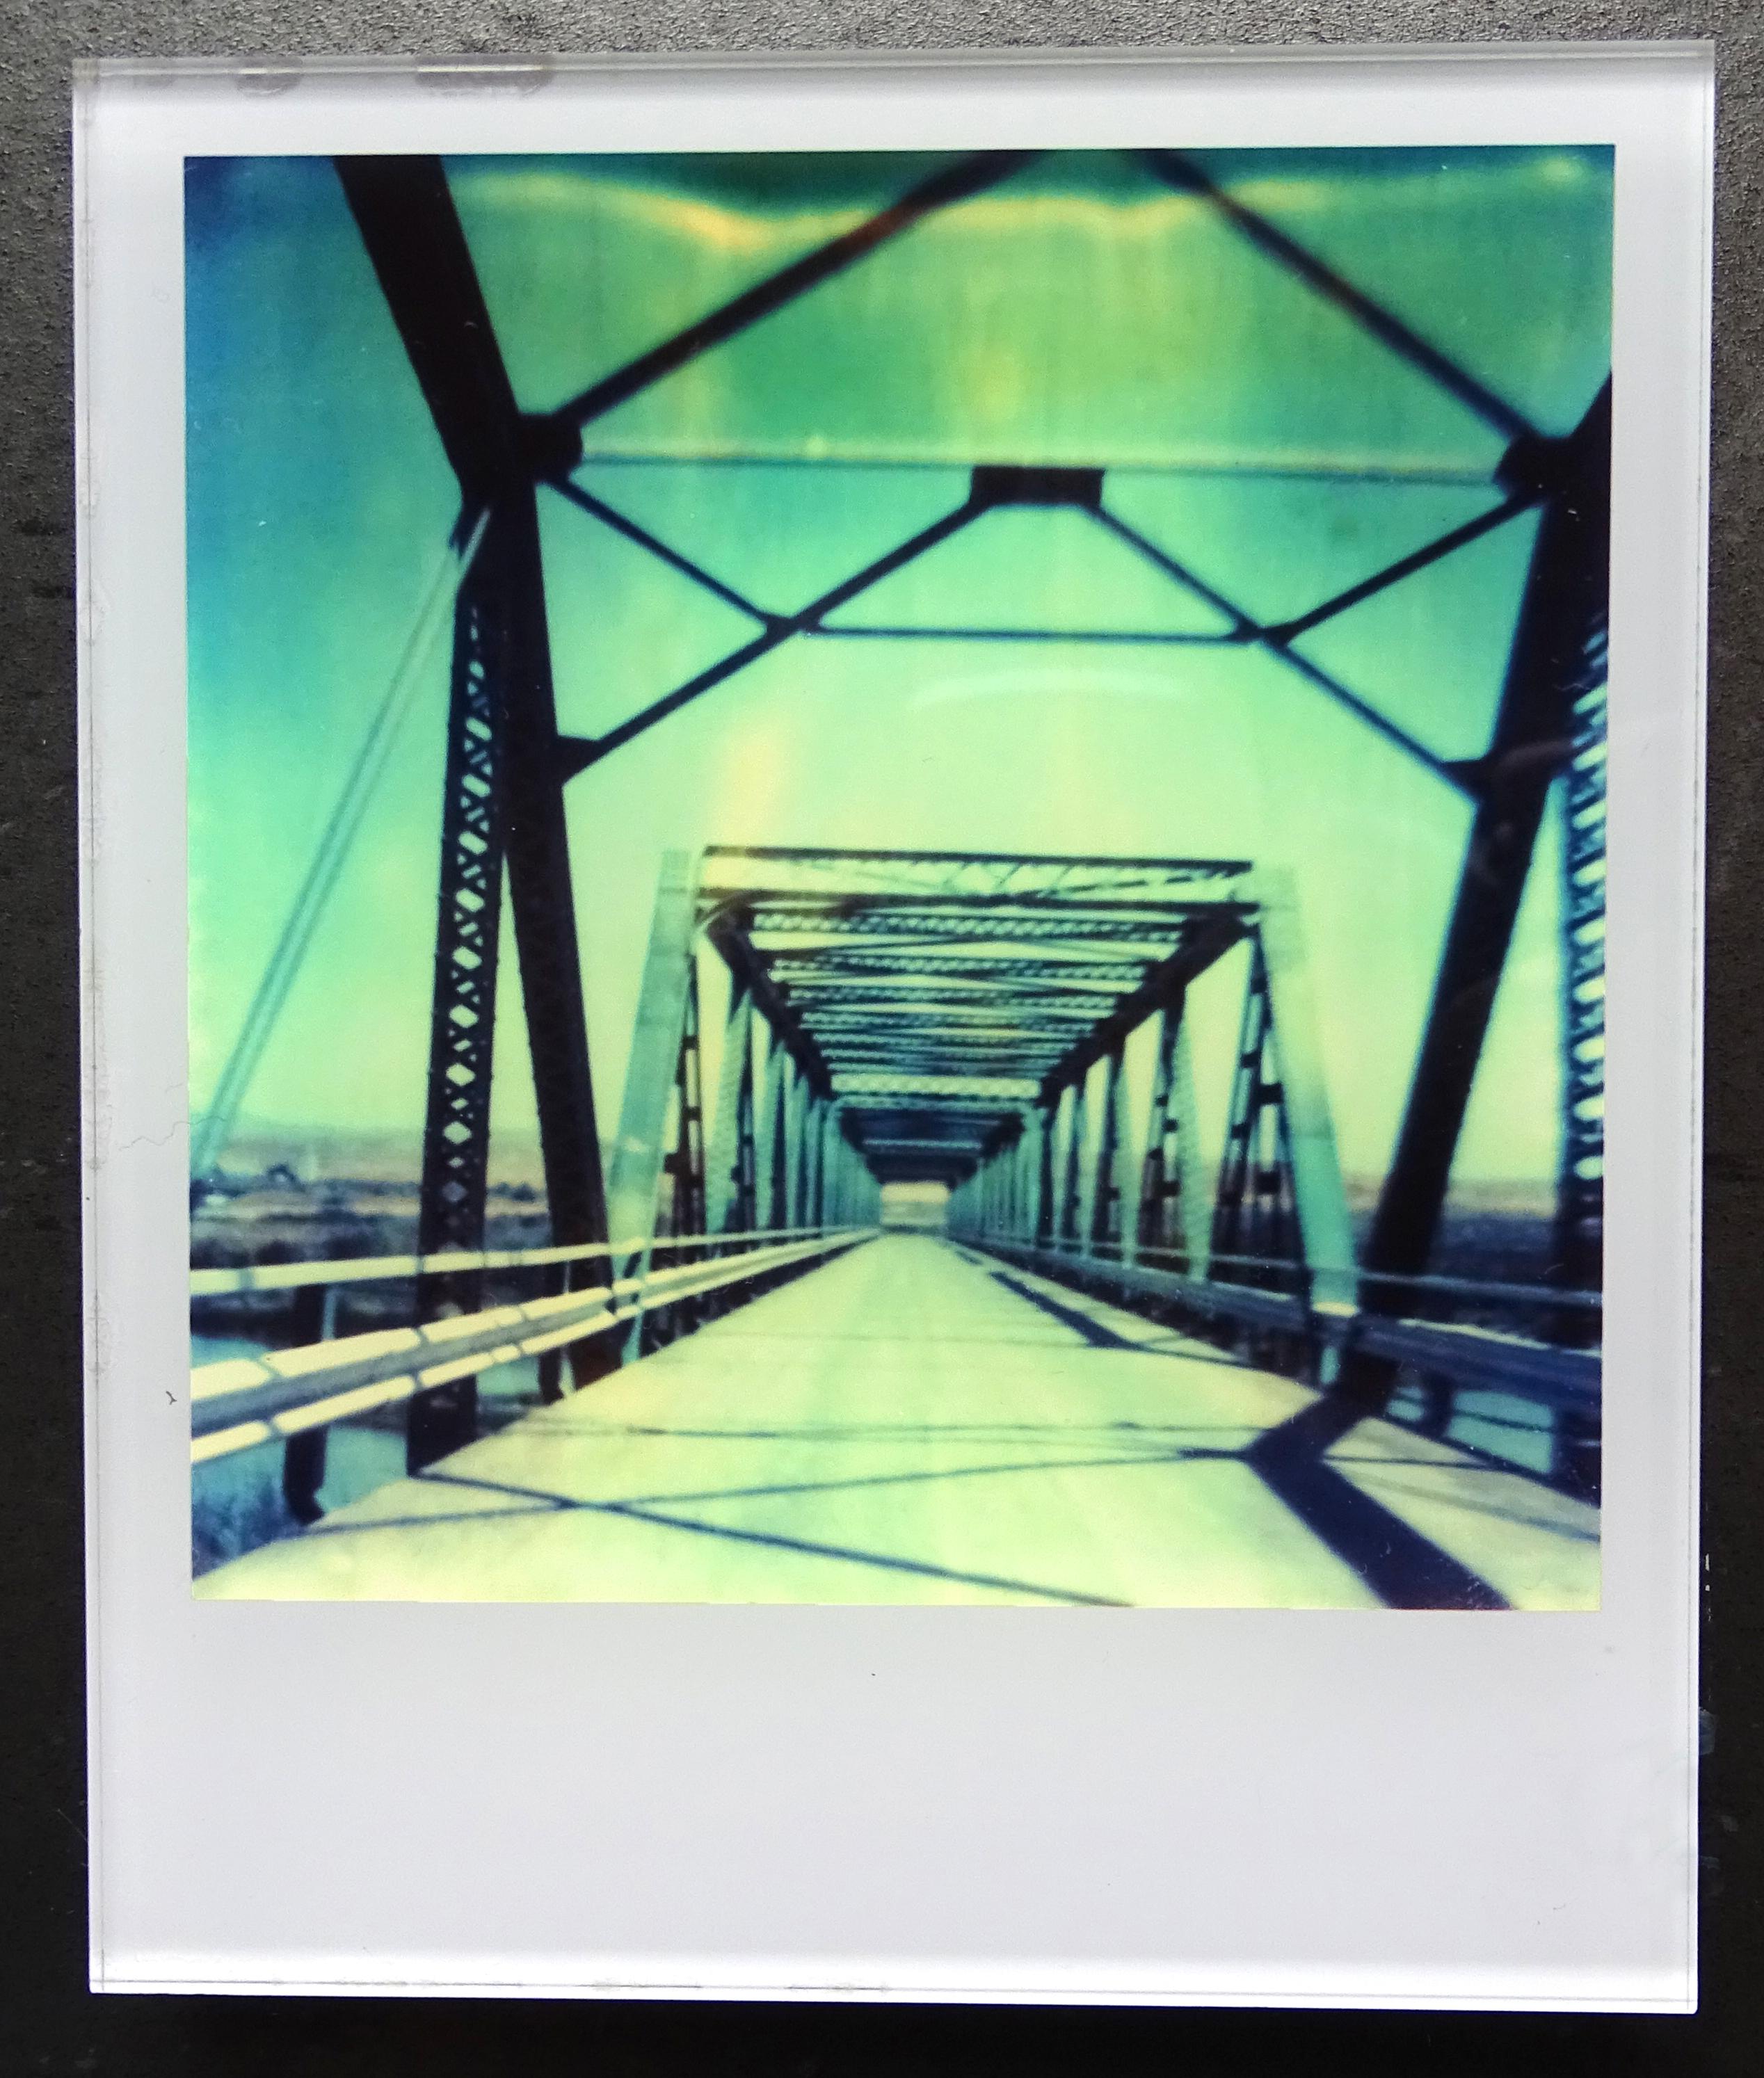 Stefanie Schneider's Minis
Blue Bridge (Stranger than Paradise), 1999

Signed and signature brand on verso.
Lambda digital Color Photographs based on a Polaroid.
Sandwiched in between Plexiglass (thickness 0.7cm)

Polaroid sized open Editions